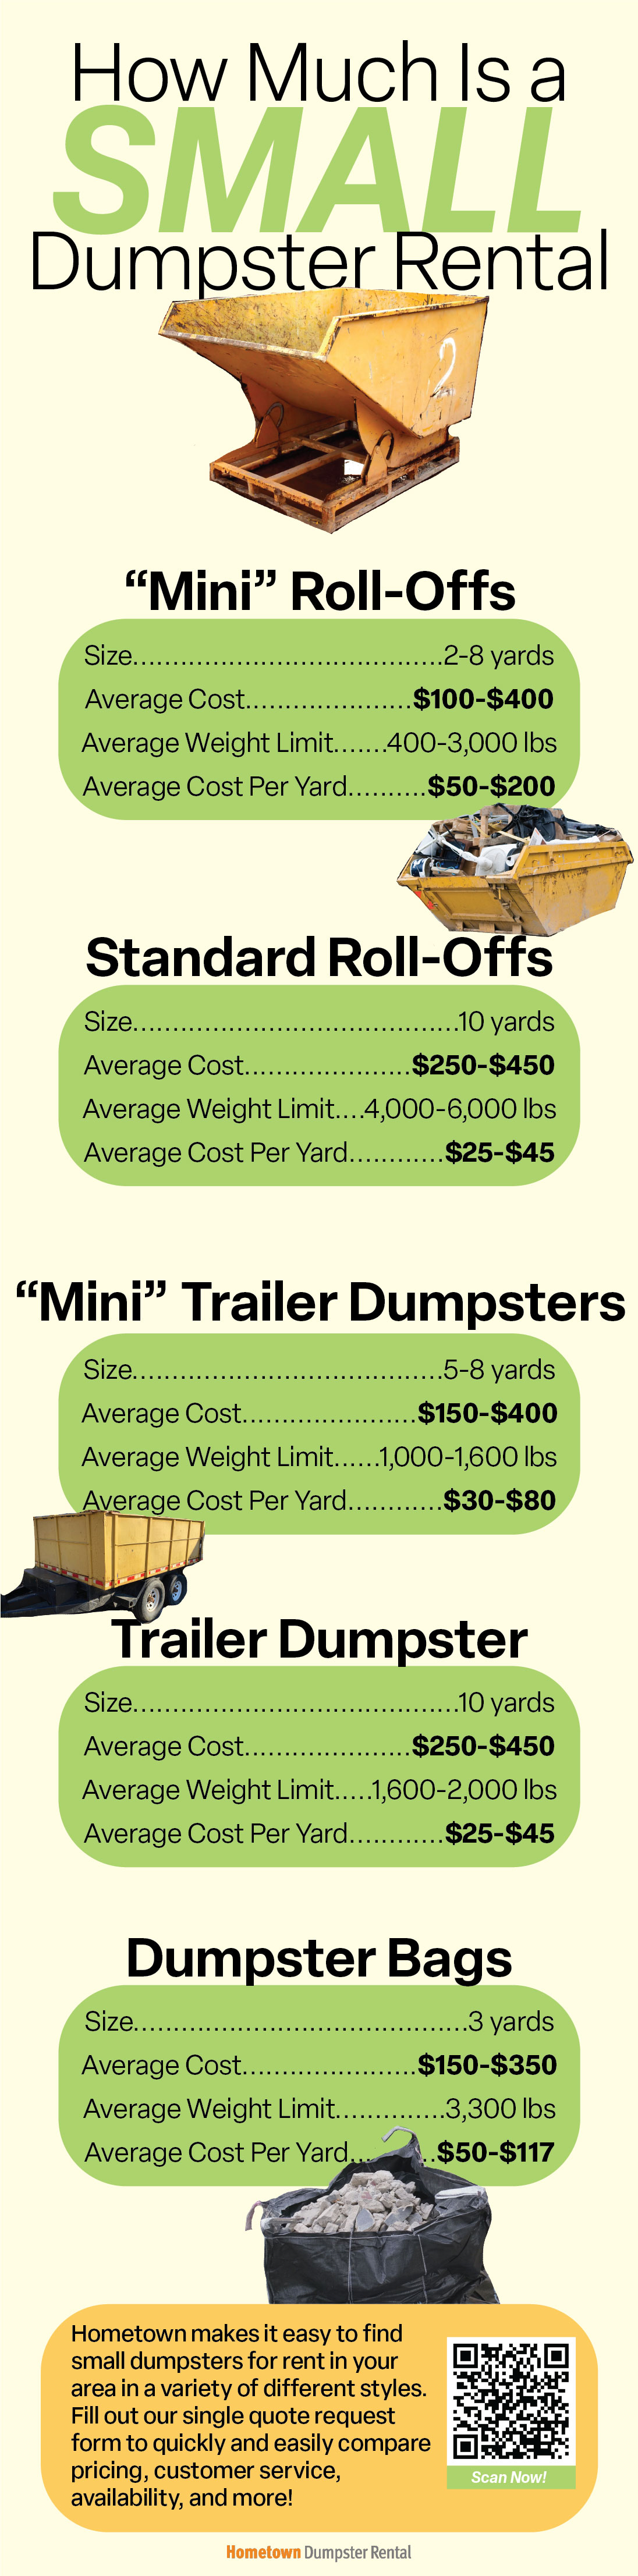 how-much-is-a-small-dumpster-rental-hometown-dumpster-rental